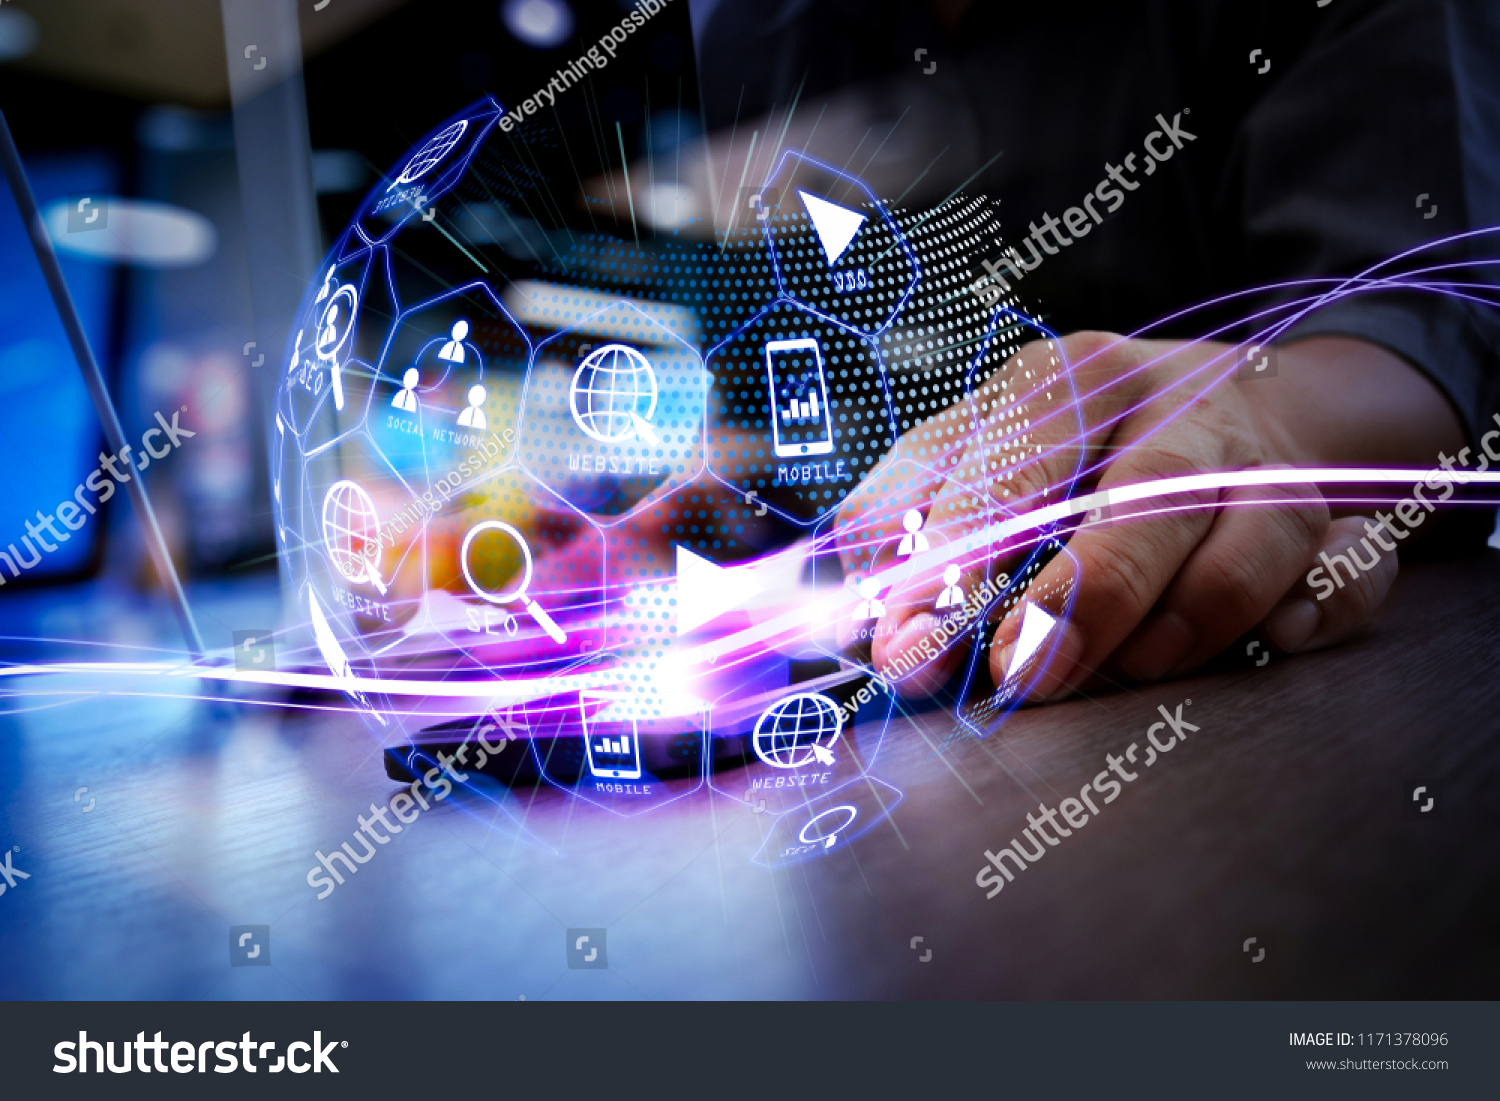 Digital marketing media (website ad, email, social network, SEO, video, mobile app) in virtual globe shape diagram.Waves of blue light and businessman using on smartphone as concept #1171378096